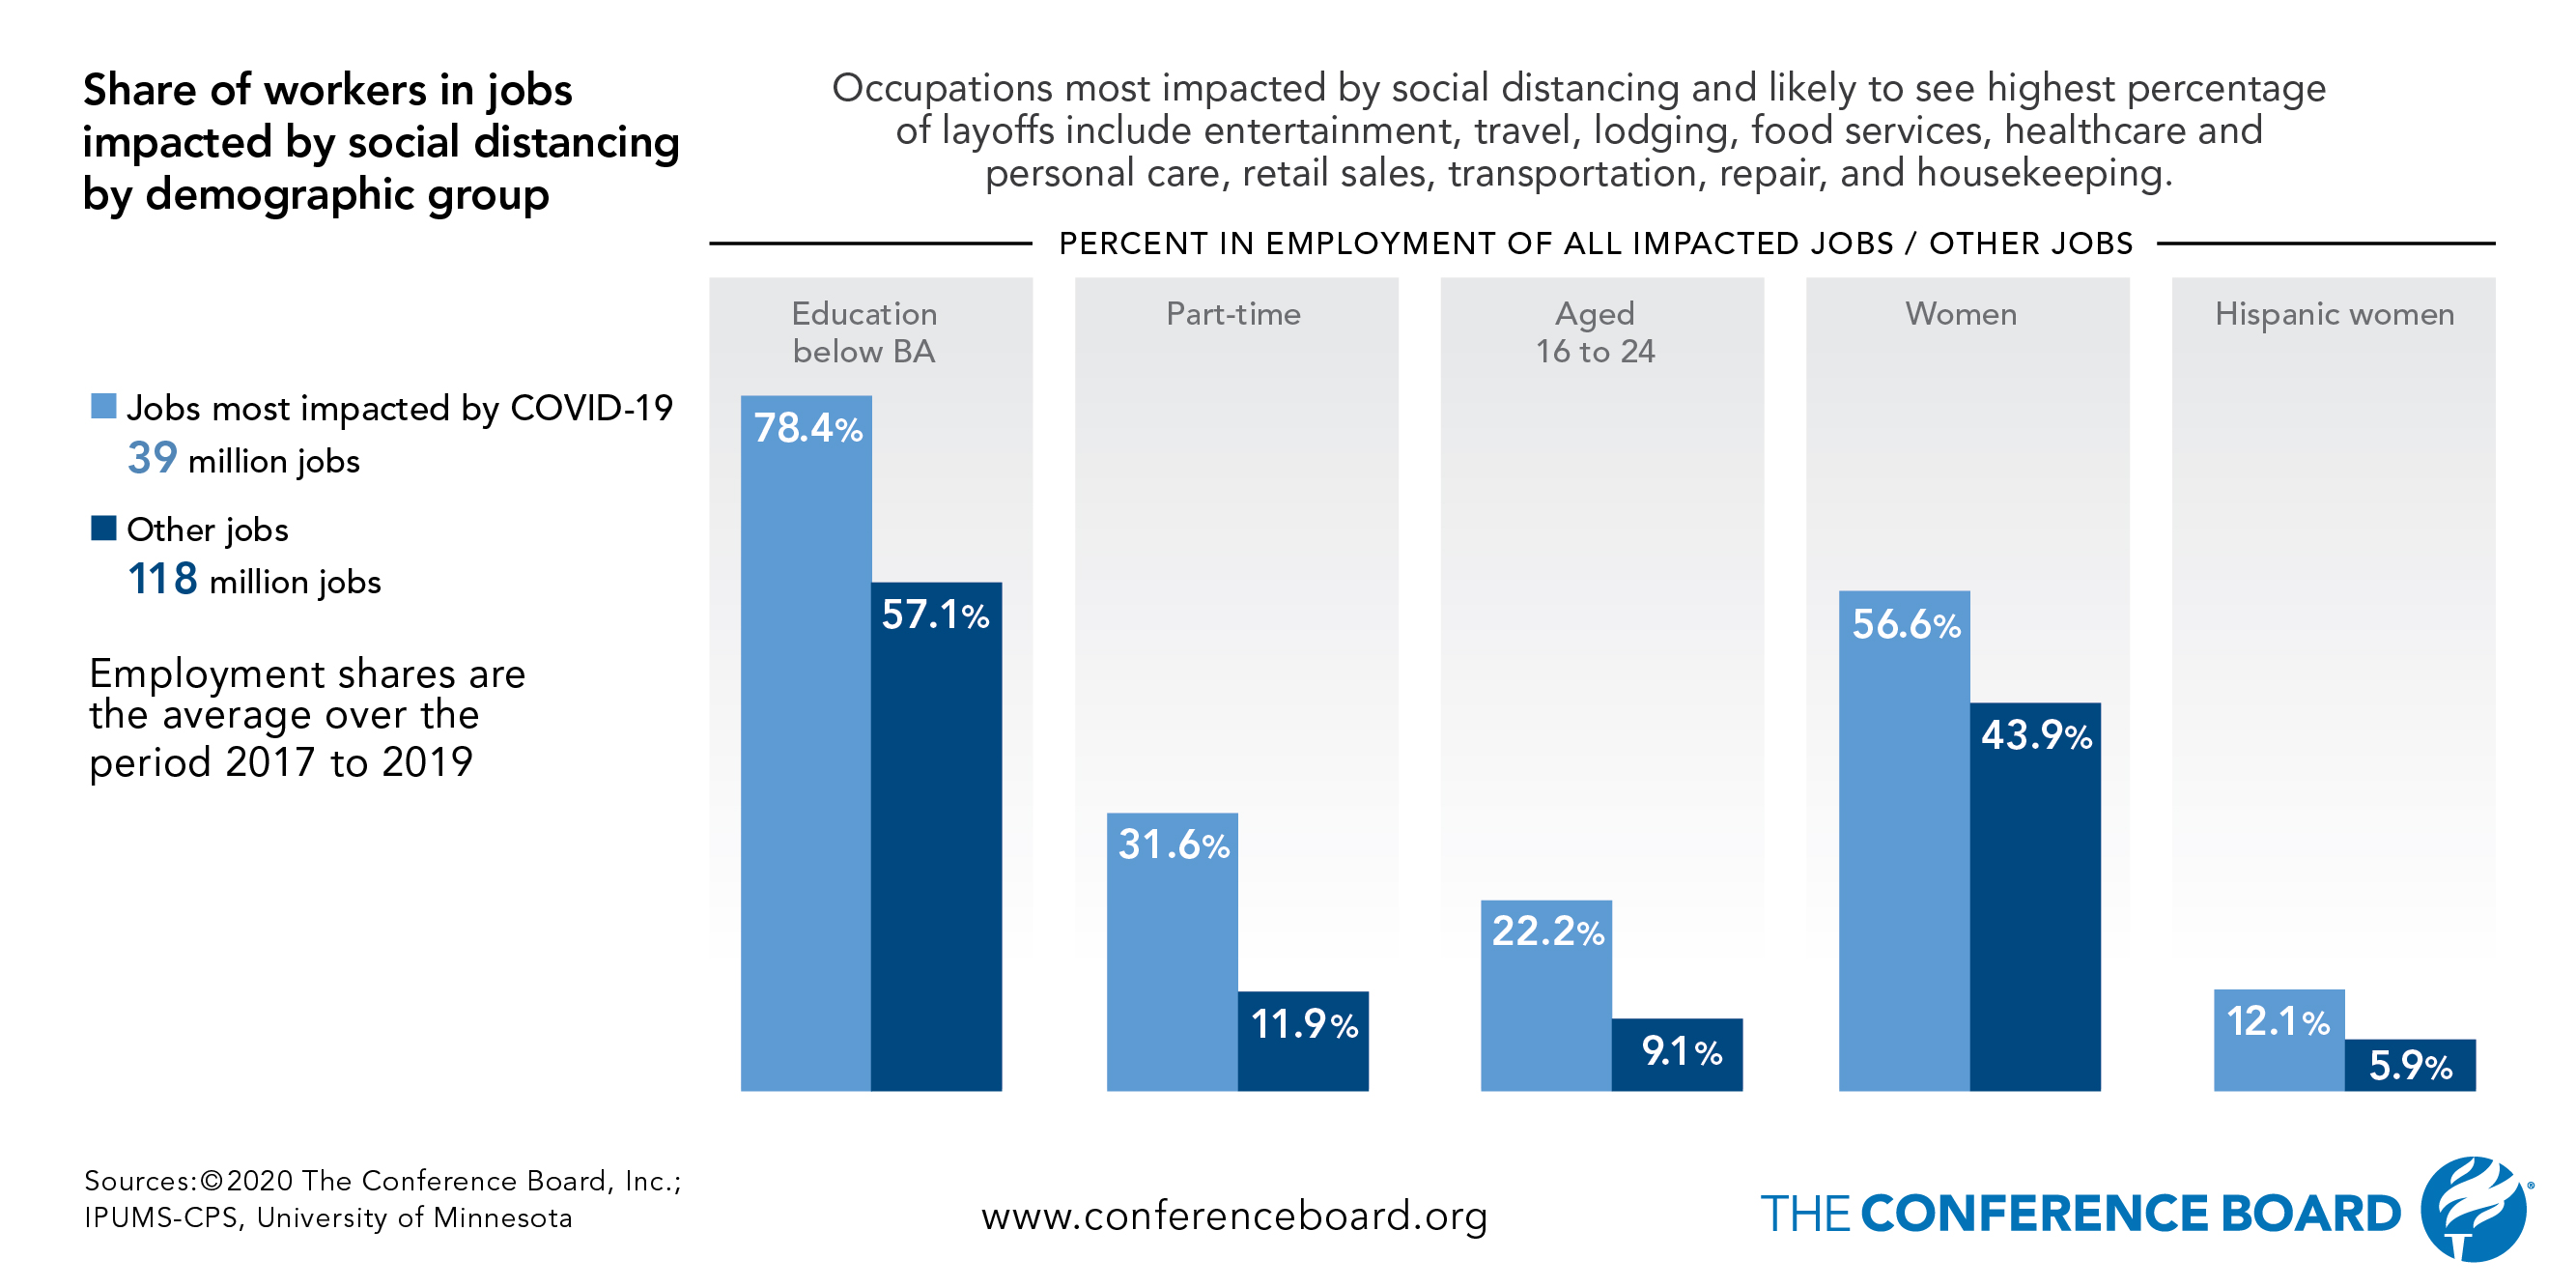 Jobs of less educated, women, and the young most vulnerable to COVID-19 layoffs